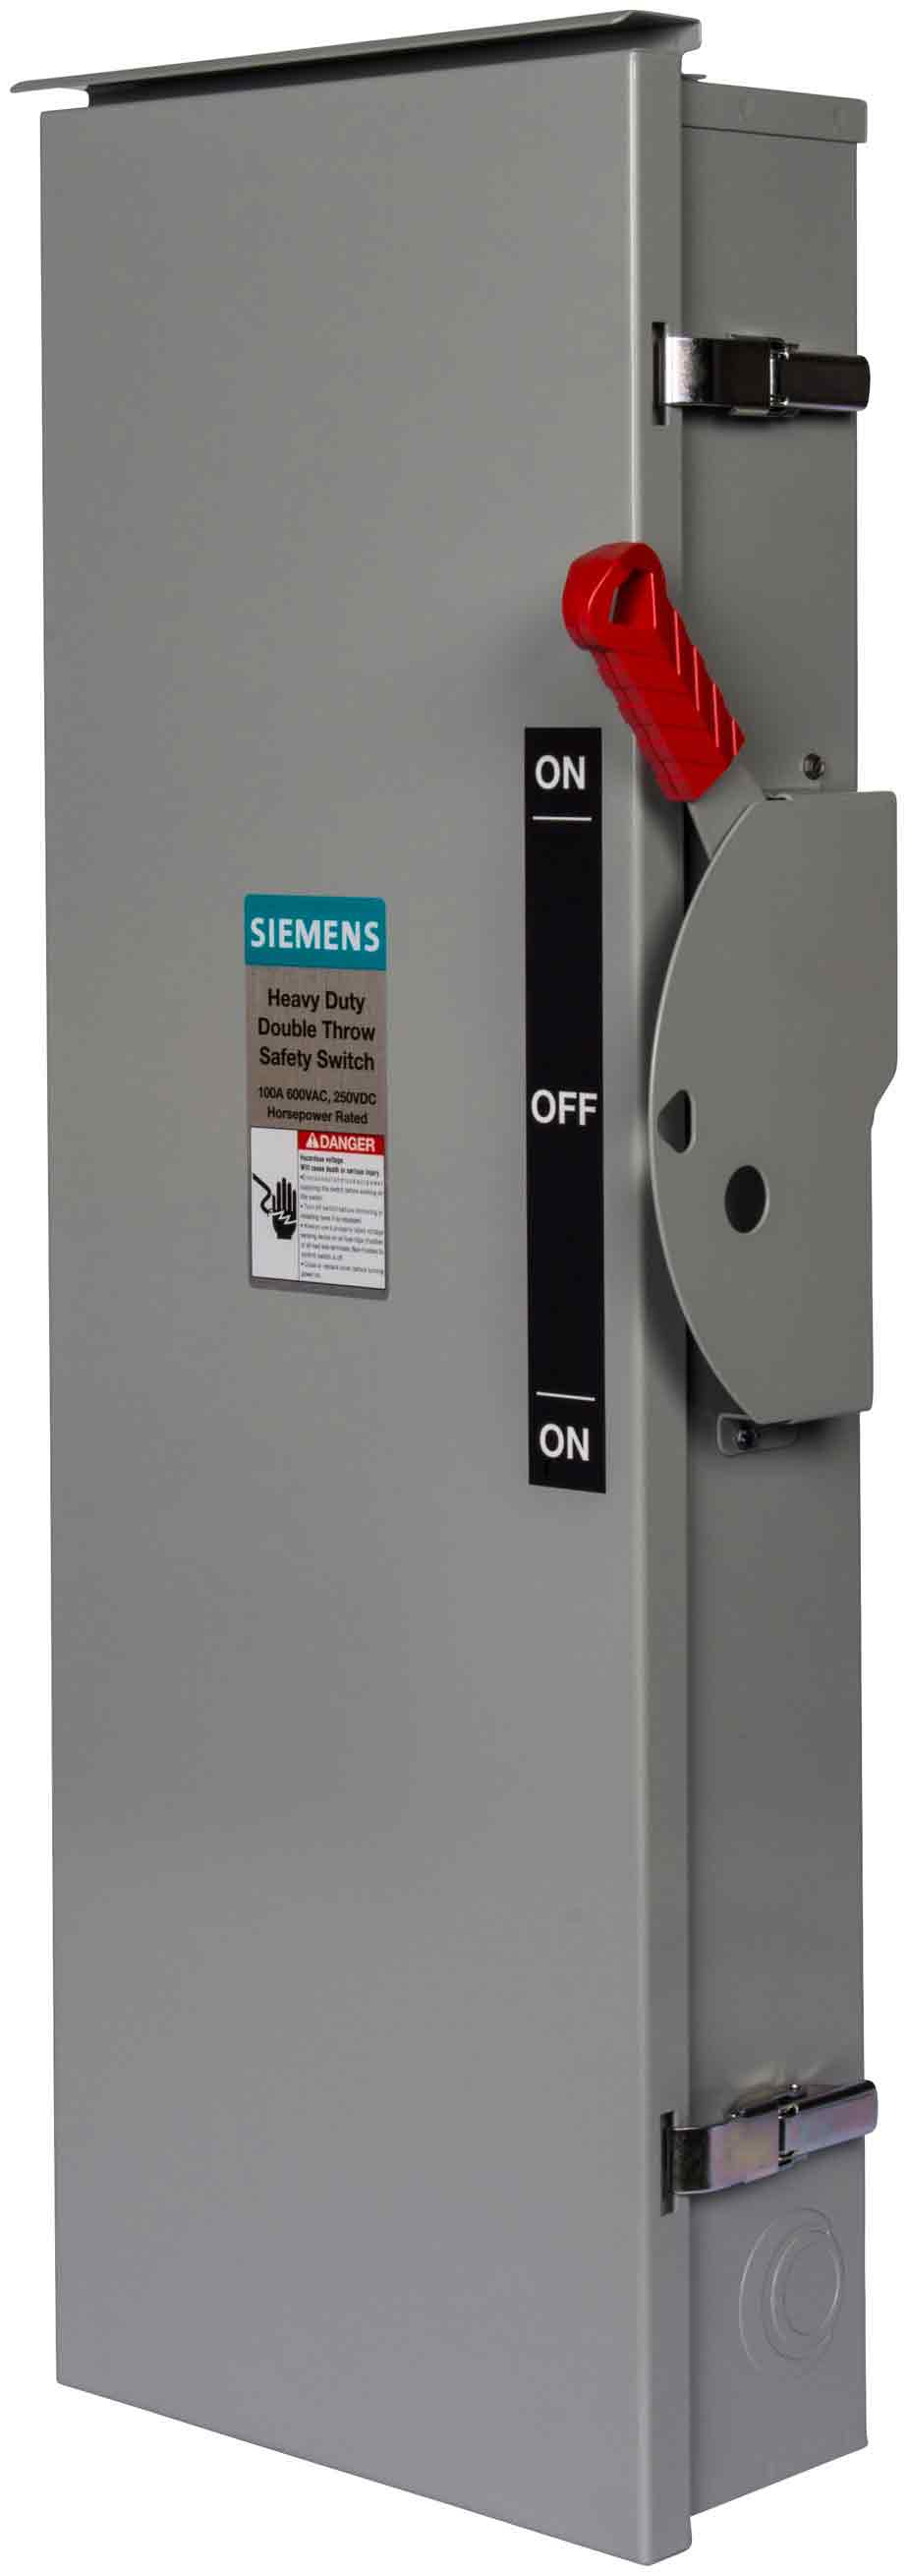 DTNF361R - Siemens - 30 Amp Disconnect Safety Switches